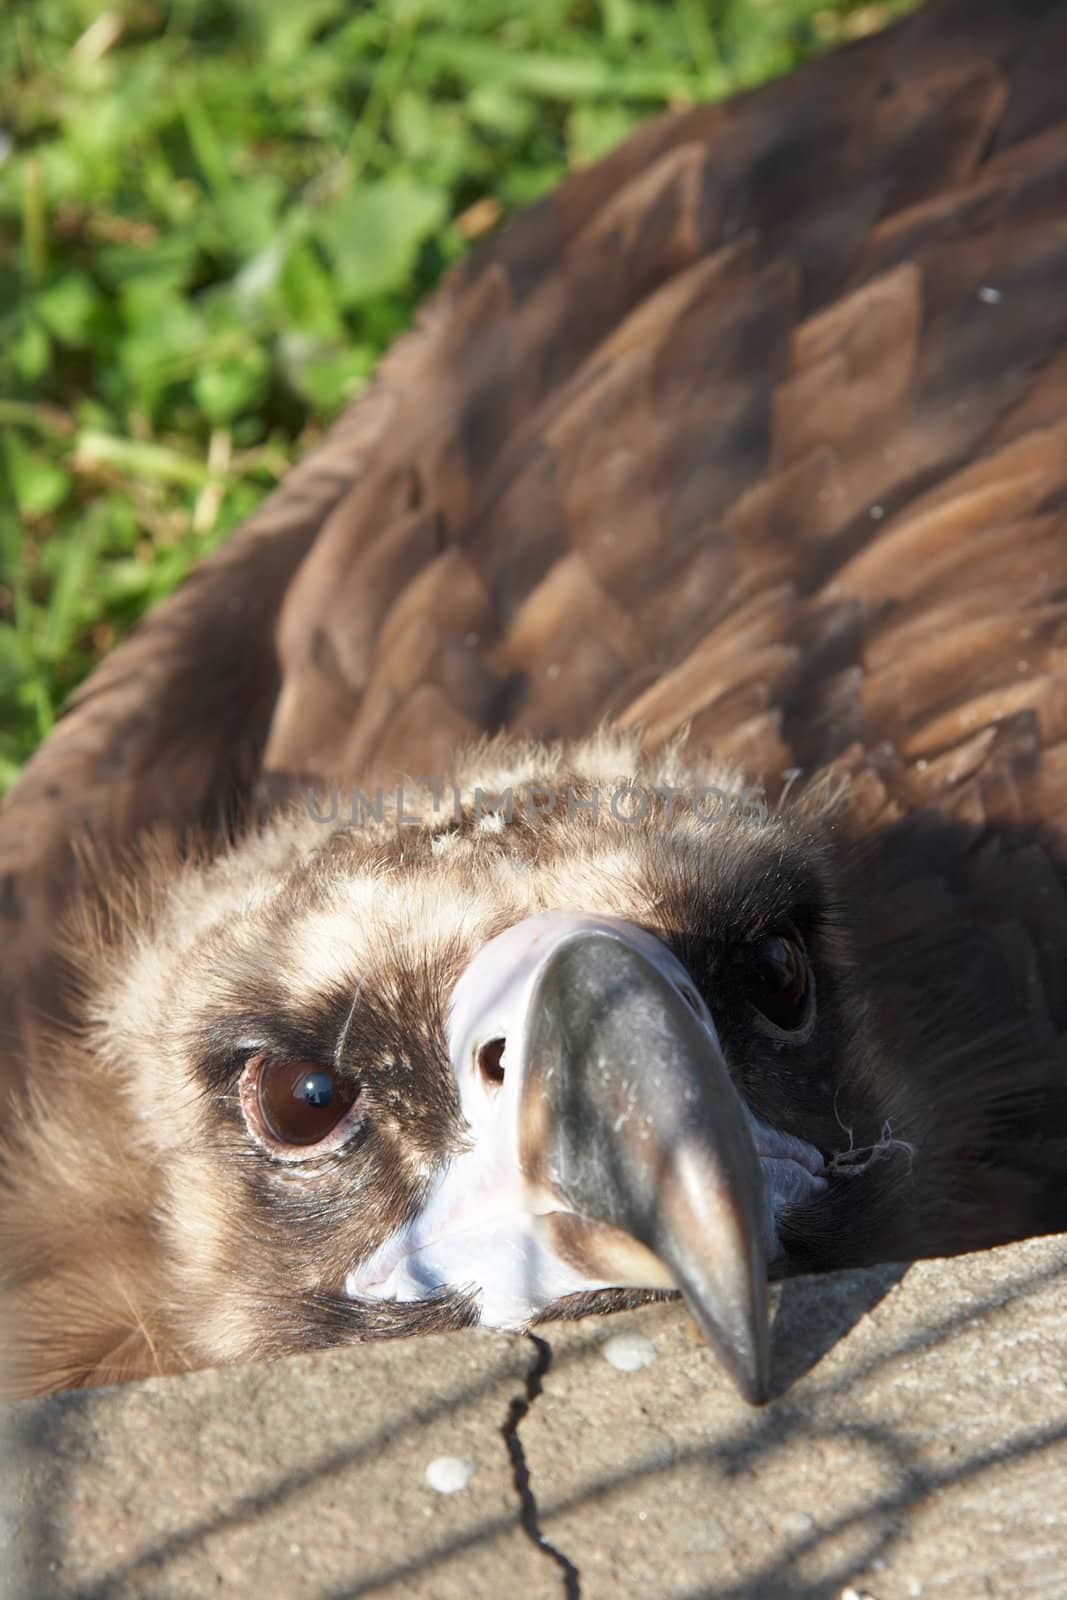 Close-up image of Eurasian Black Vulture (Aegypius Monachus). Also known as Monk or Cinereous Vulture.